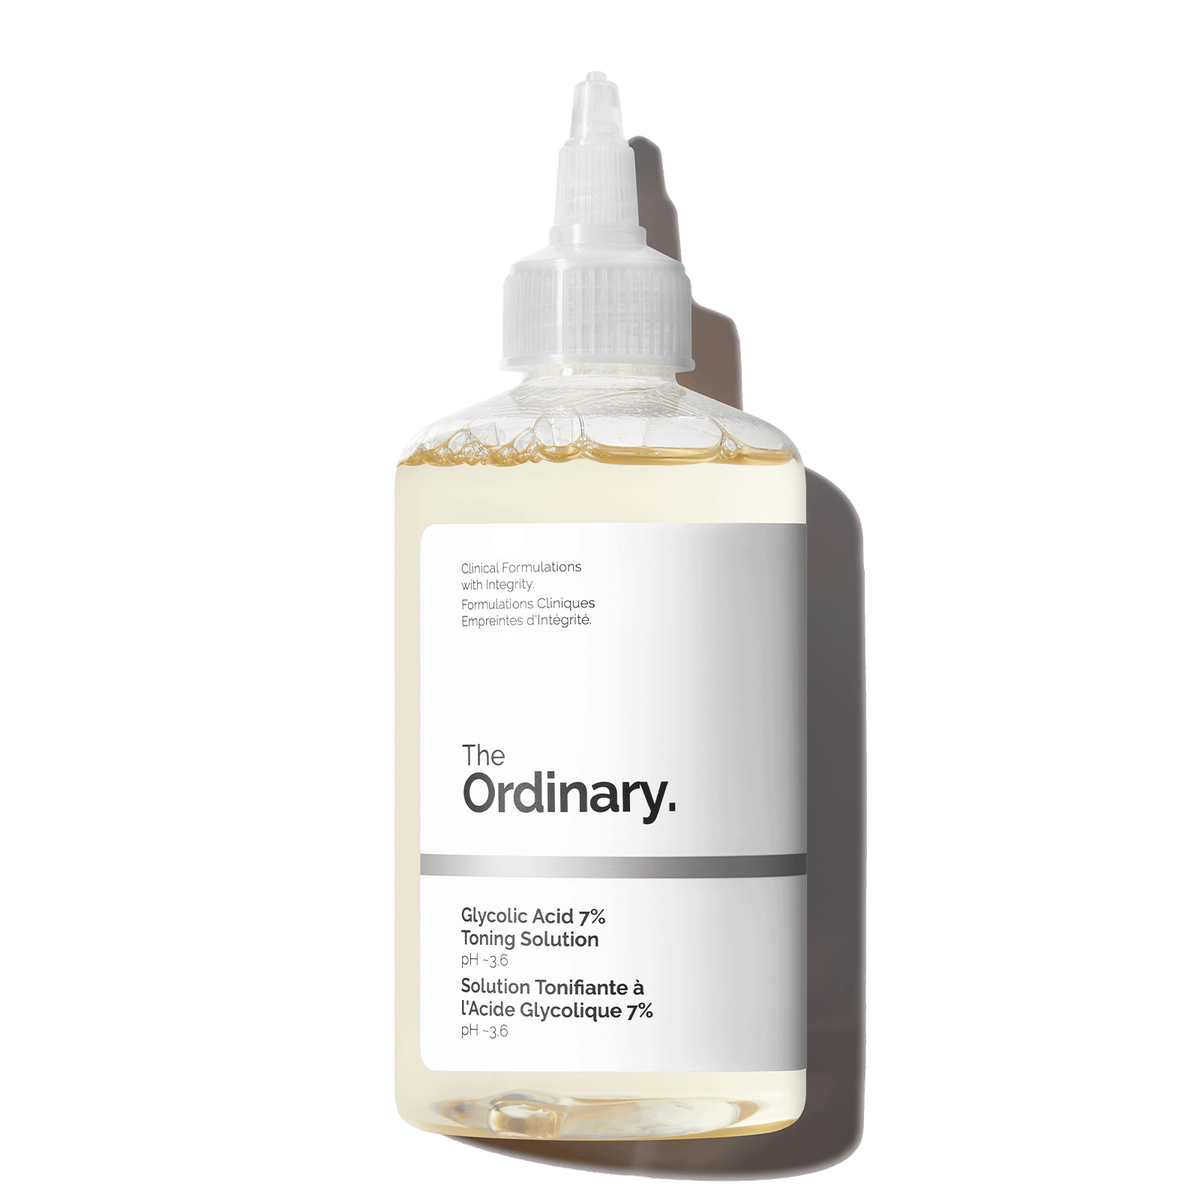 The Ordinary's Glycolic Acid Toning Solution